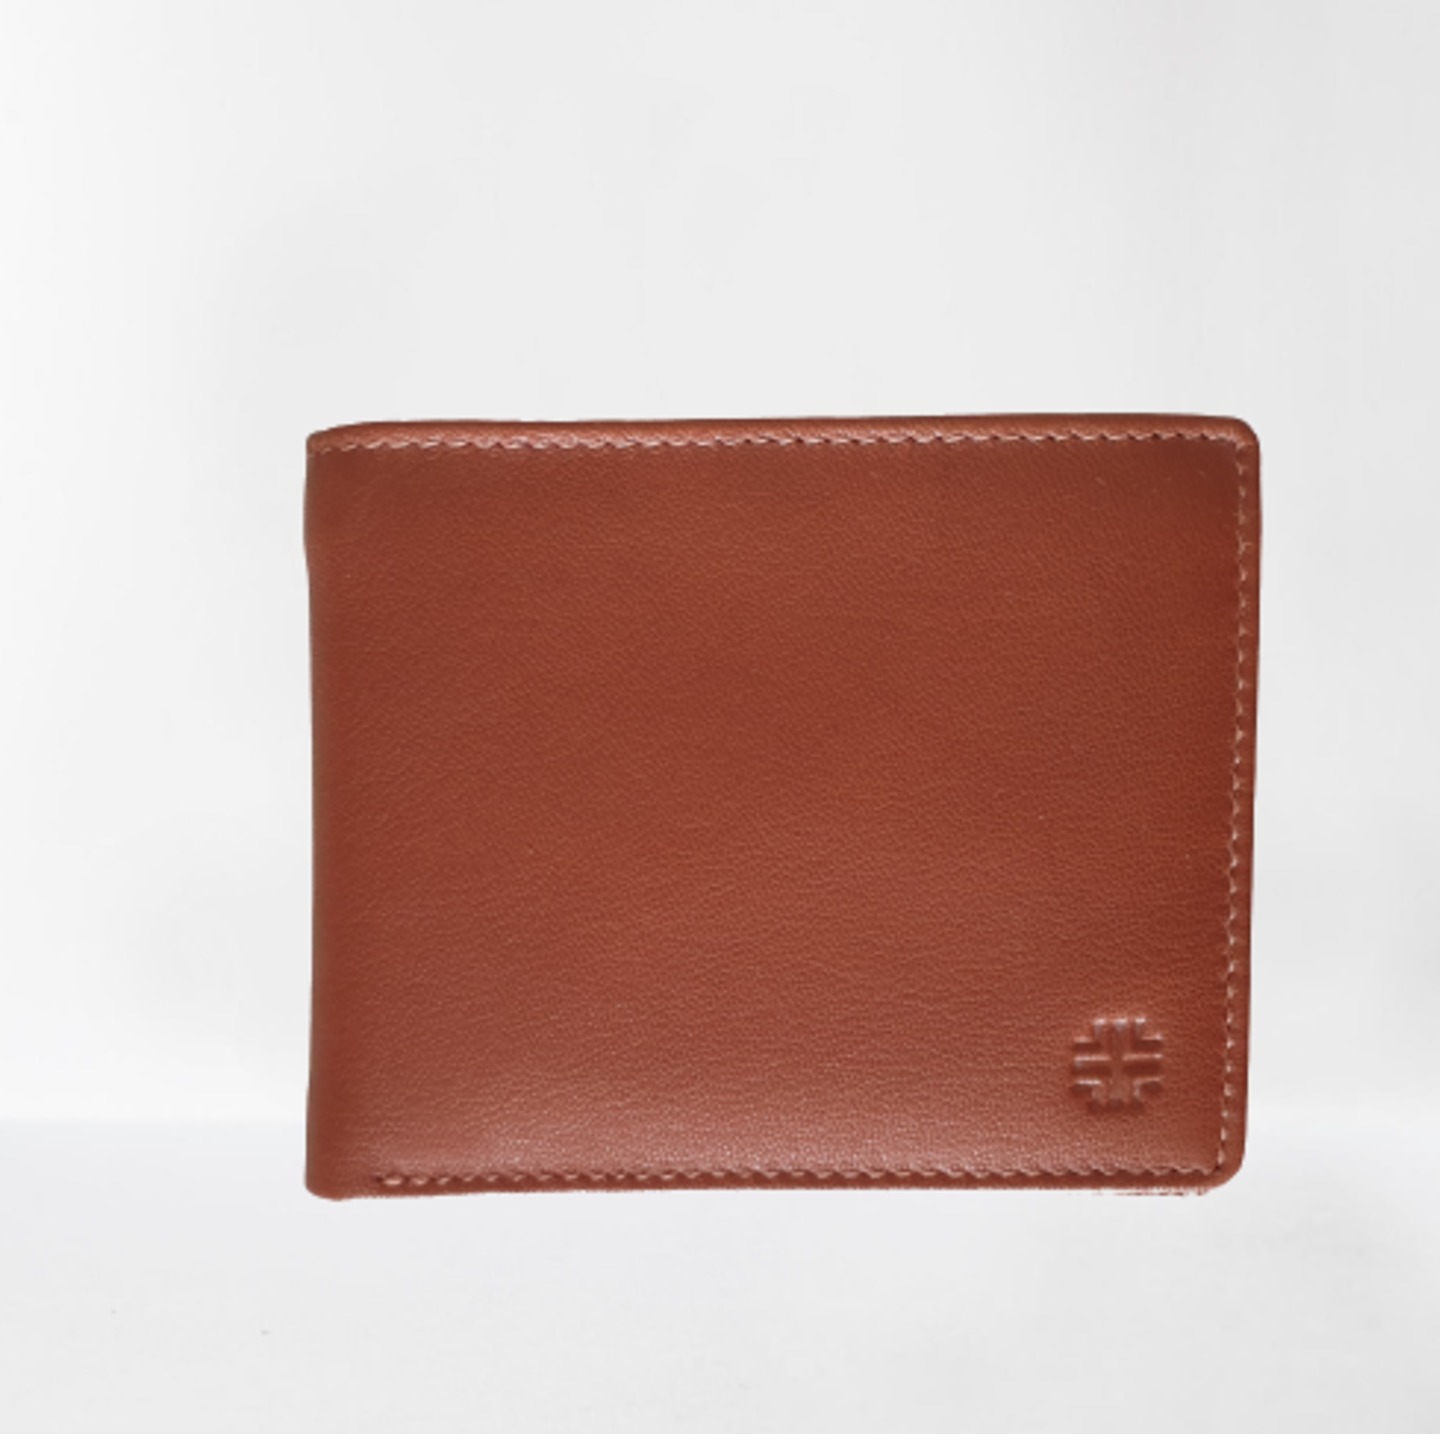 Mens Real Leather Wallet - 504 Tan RFID Secure